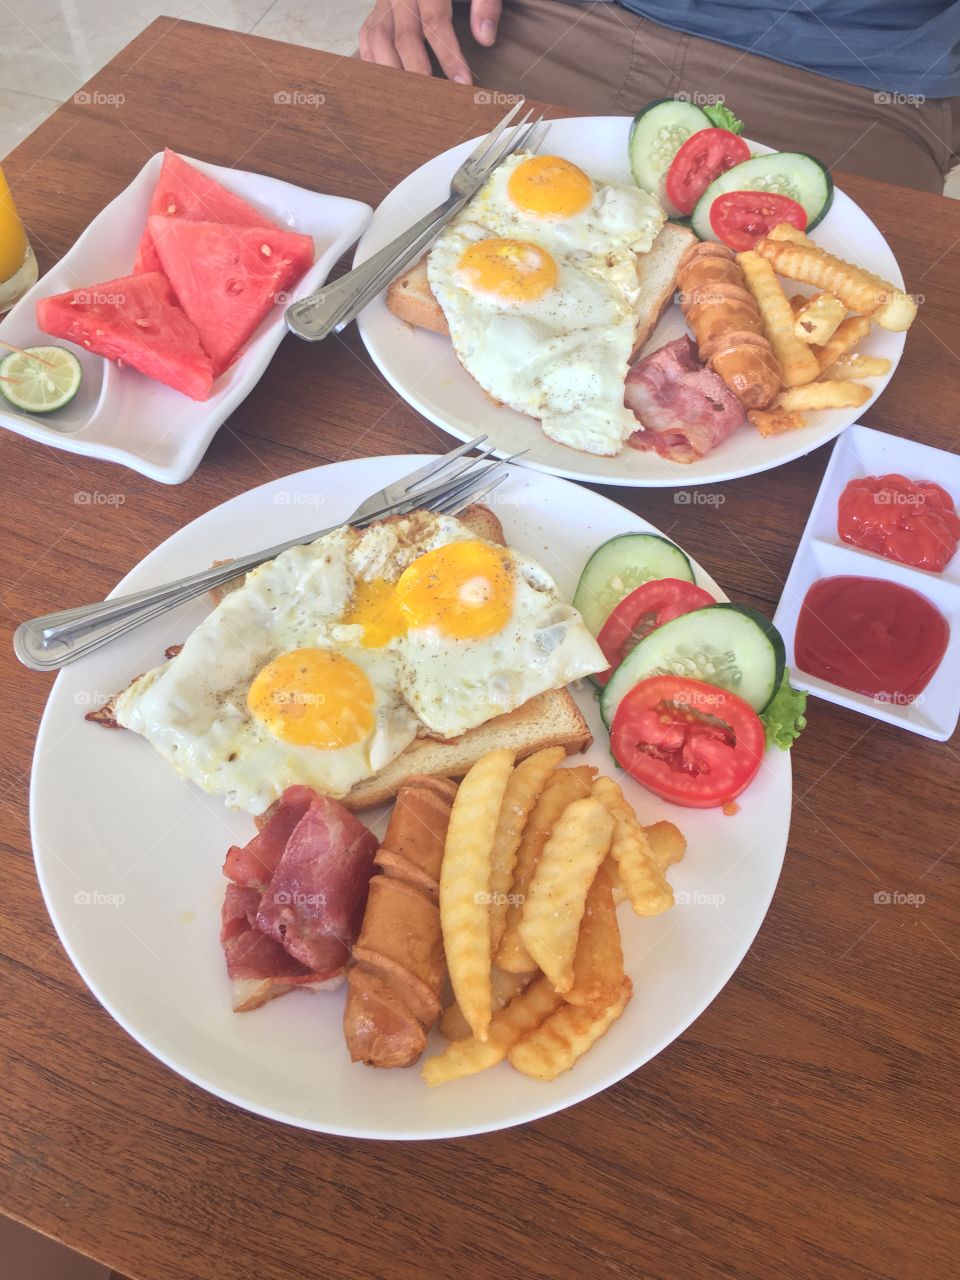 Airbnb stay in bali having a great and yummy breakfast provide by the owner